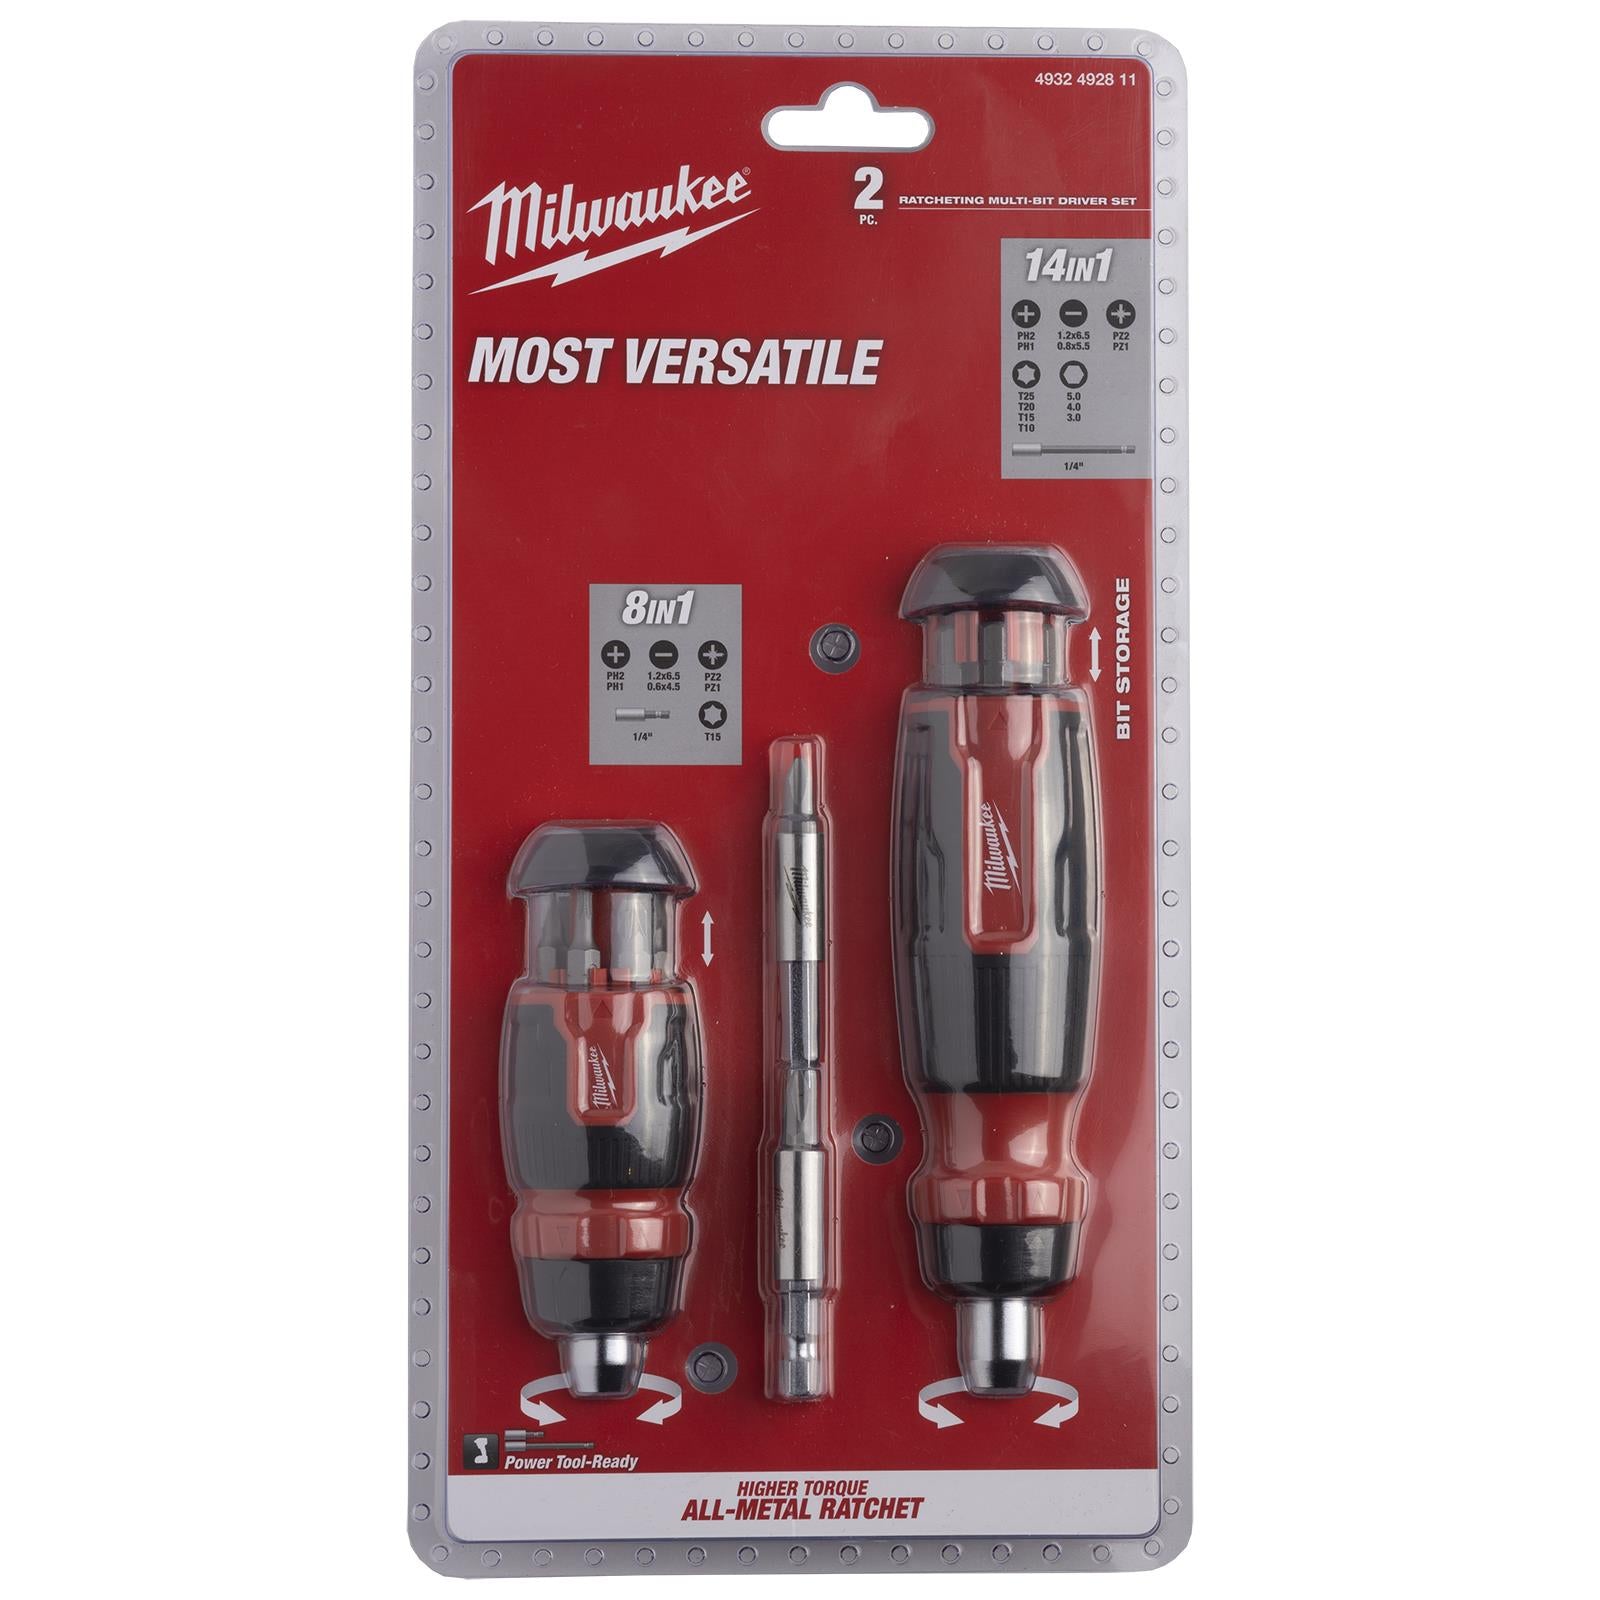 Milwaukee Ratchet Screwdriver Set Kit 2 Piece Compact 8 in 1 and Standard 14 in 1